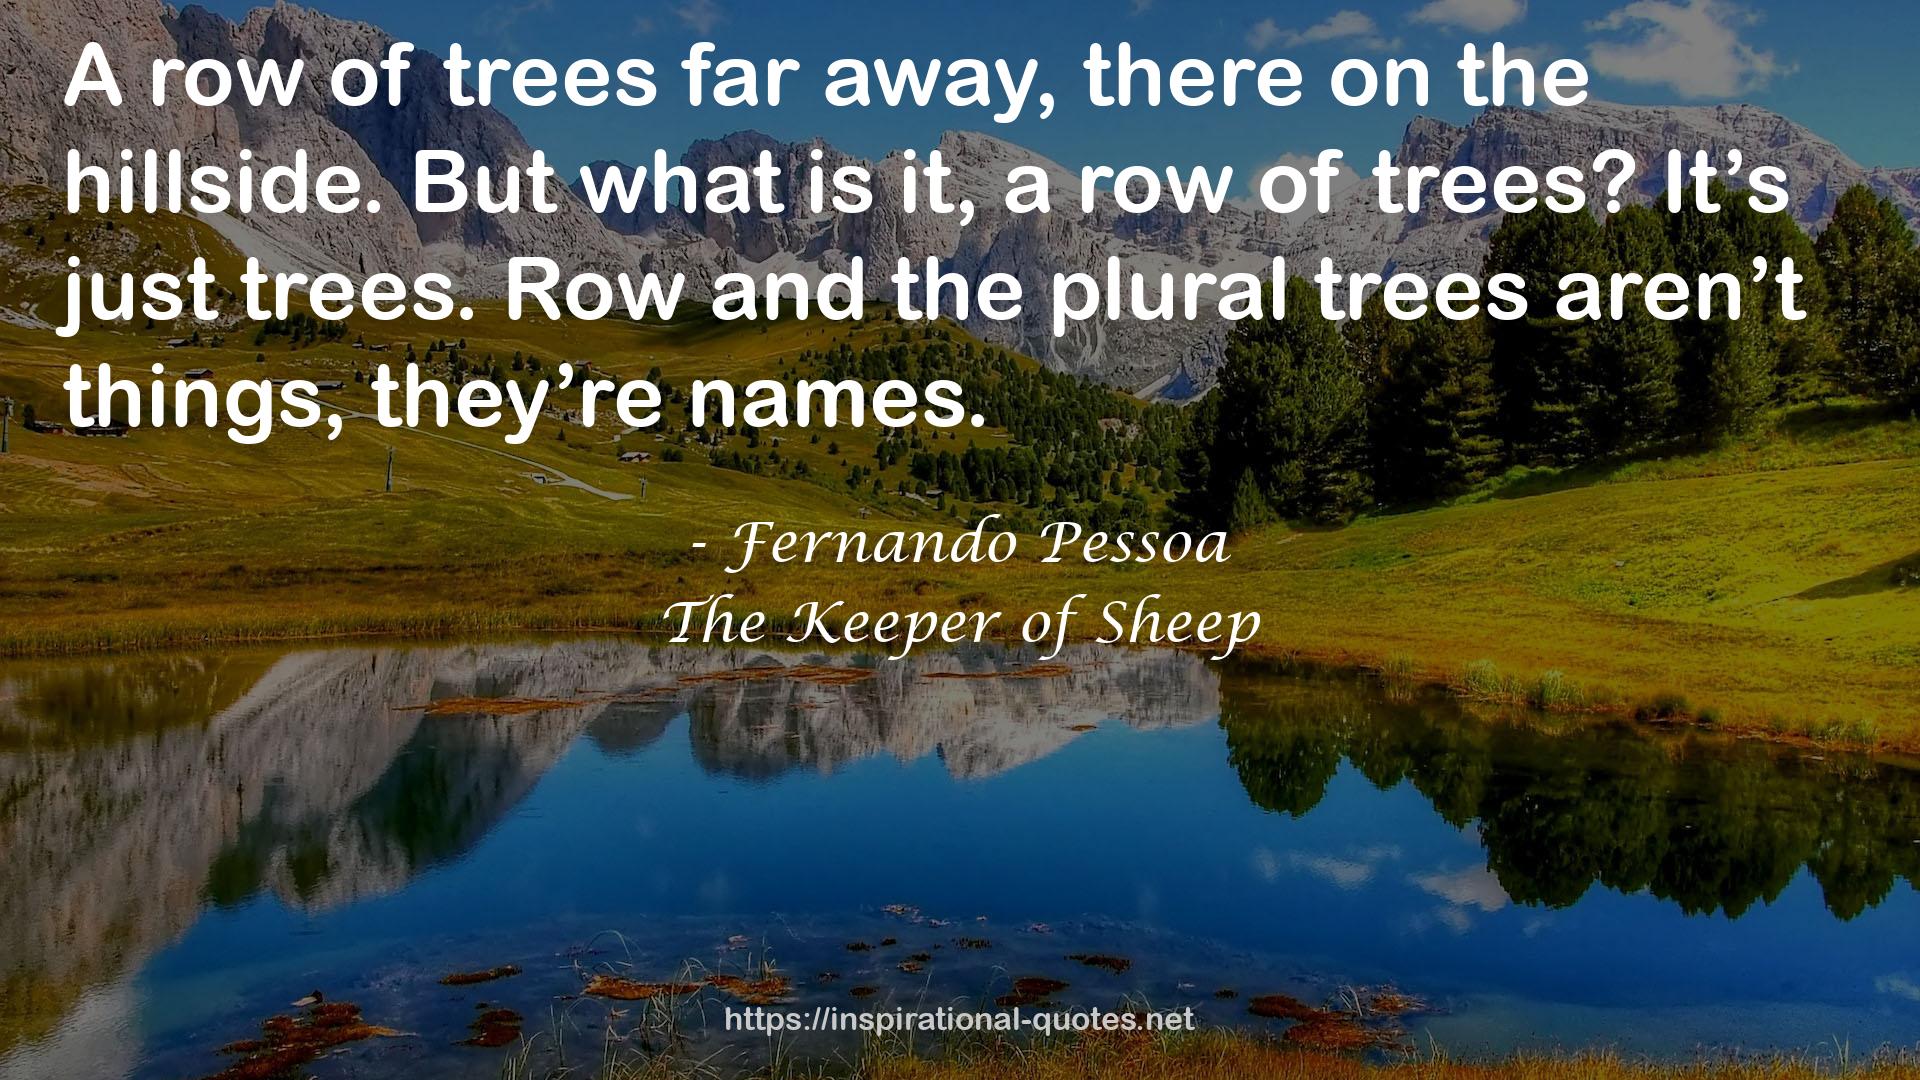 the plural trees  QUOTES